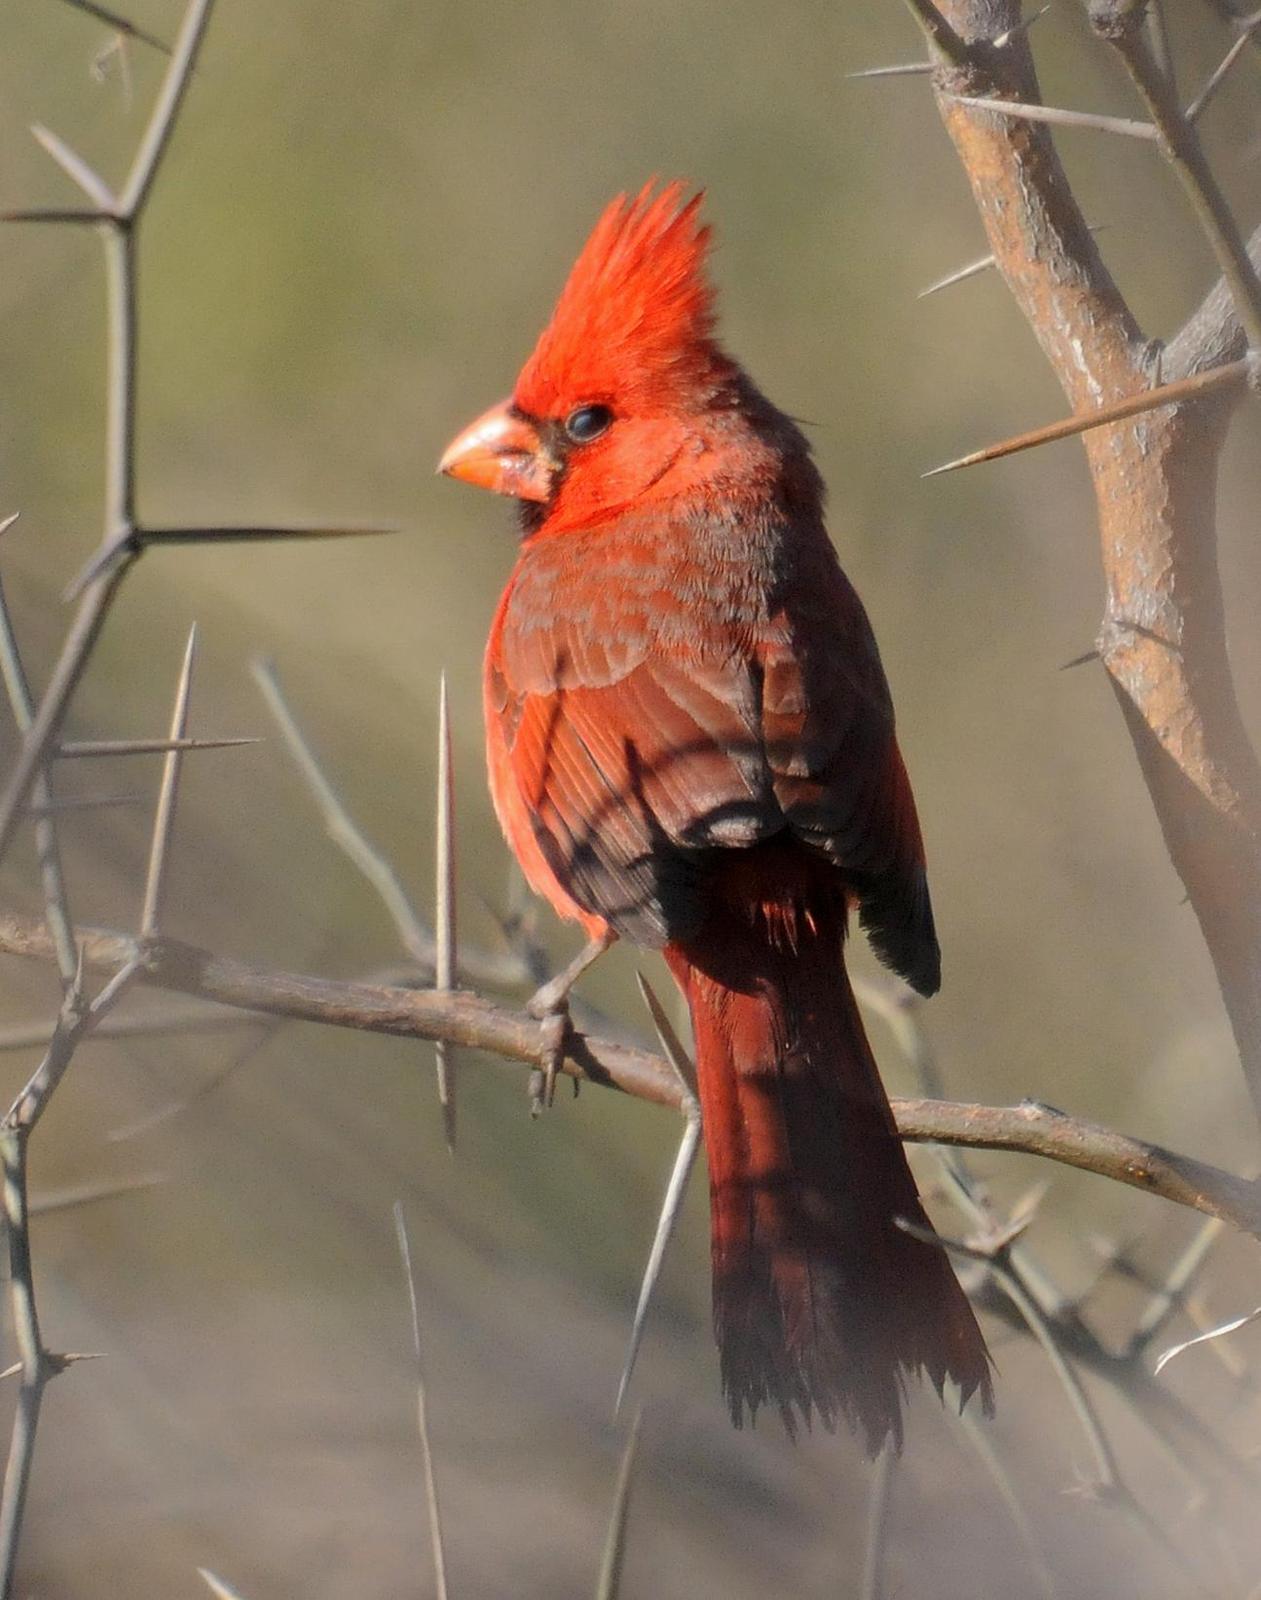 Northern Cardinal Photo by Steven Mlodinow